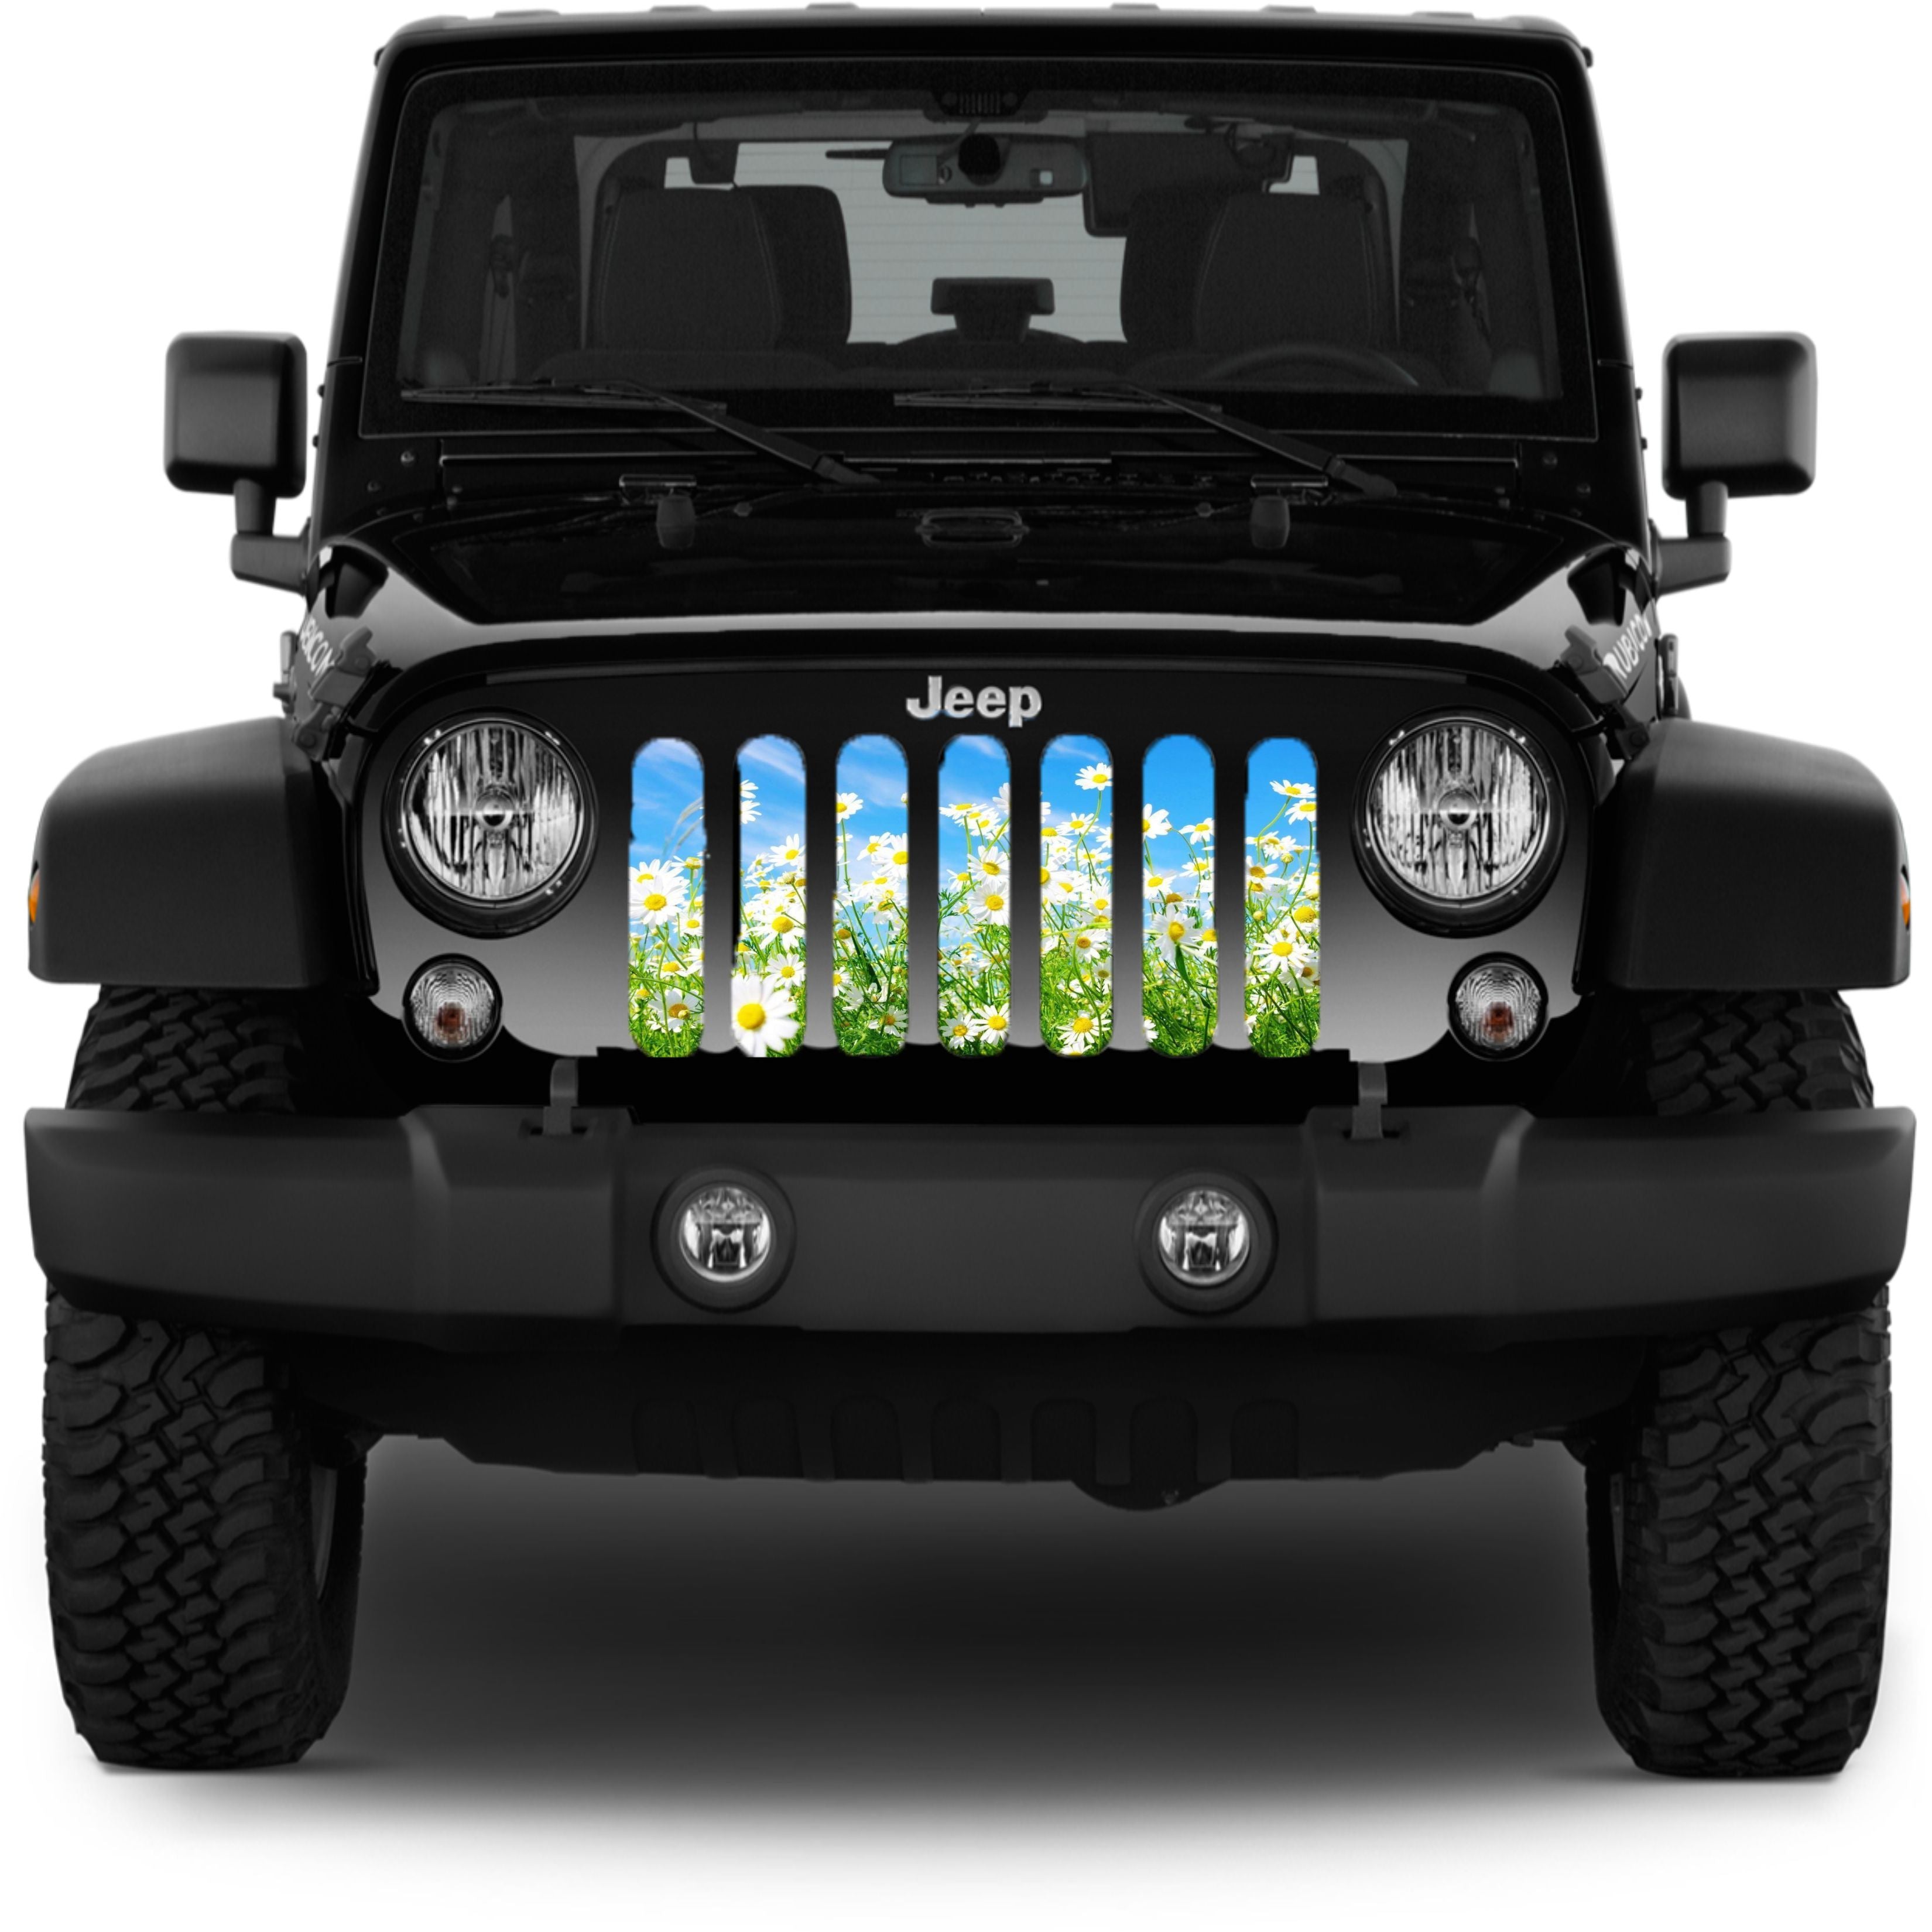 A Field of Daisies Grille Mesh Insert for Jeep